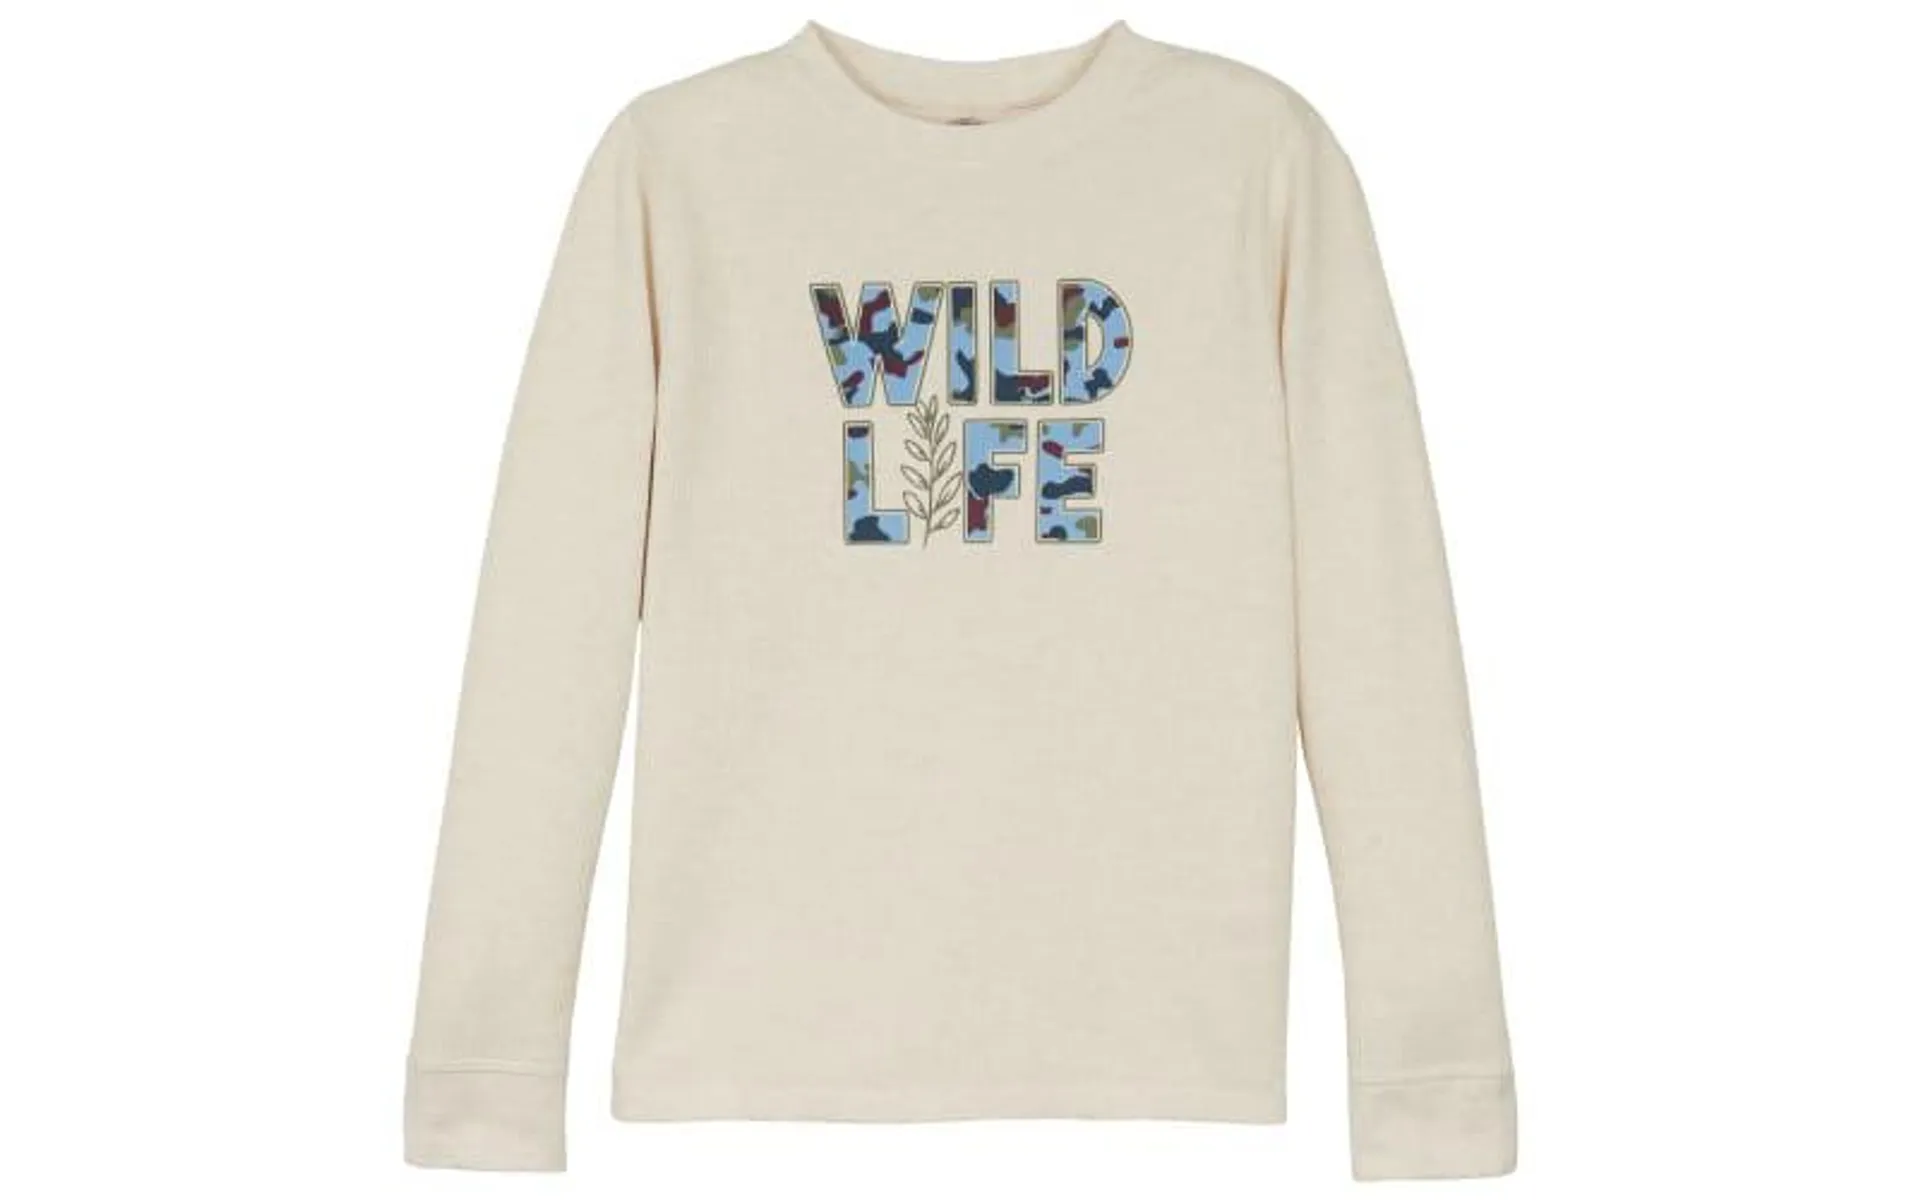 Outdoor Kids Wild Life Knit Long-Sleeve Thermal Shirt for Toddlers or Kids